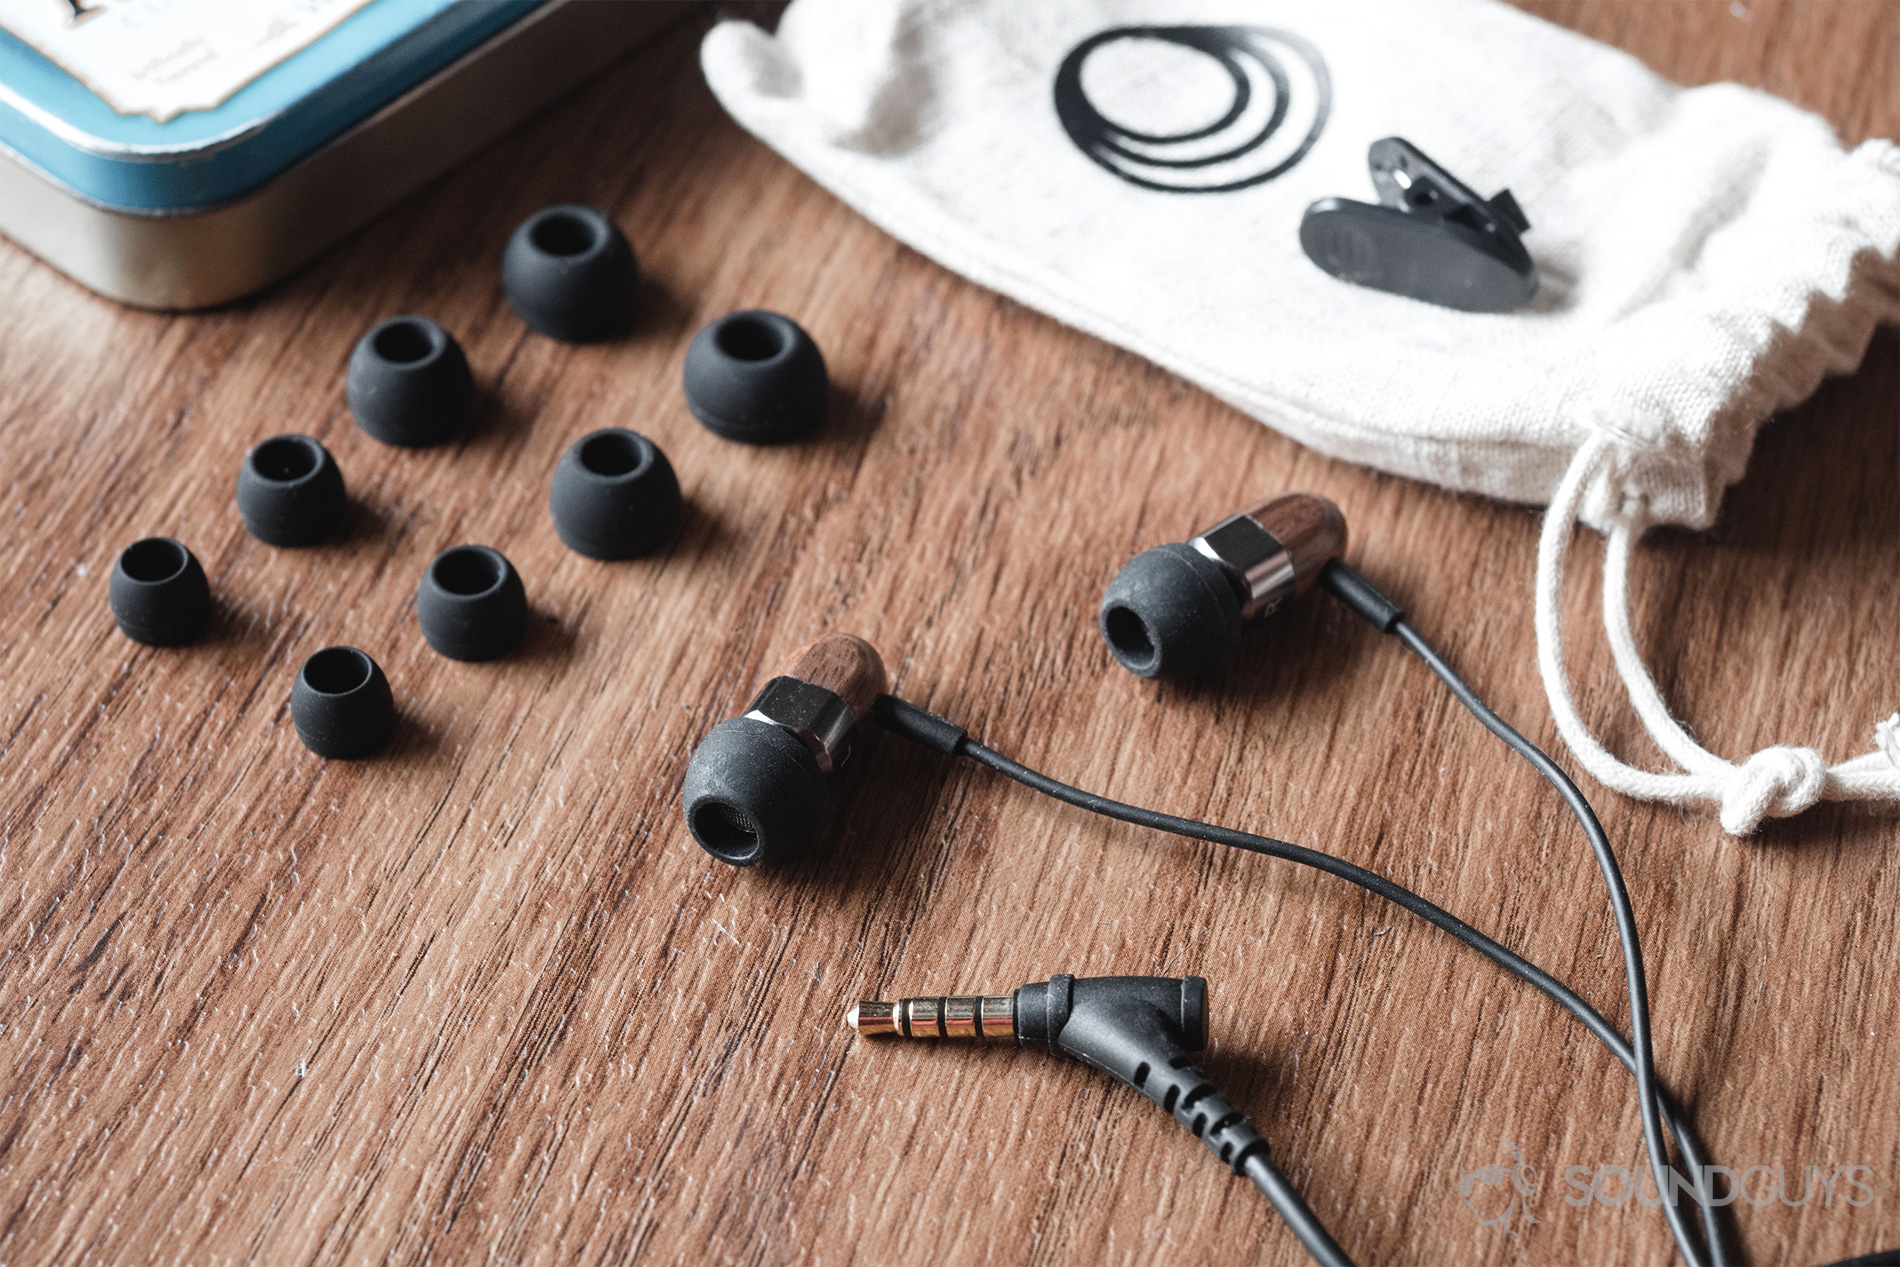 Thinksound ts03+mic review: A layout of all that's included with the 'buds. S/M/L/XL ear tips, a shirt clip, the earbuds, and a cotton drawsting pouch. All on wood-laminate surface.